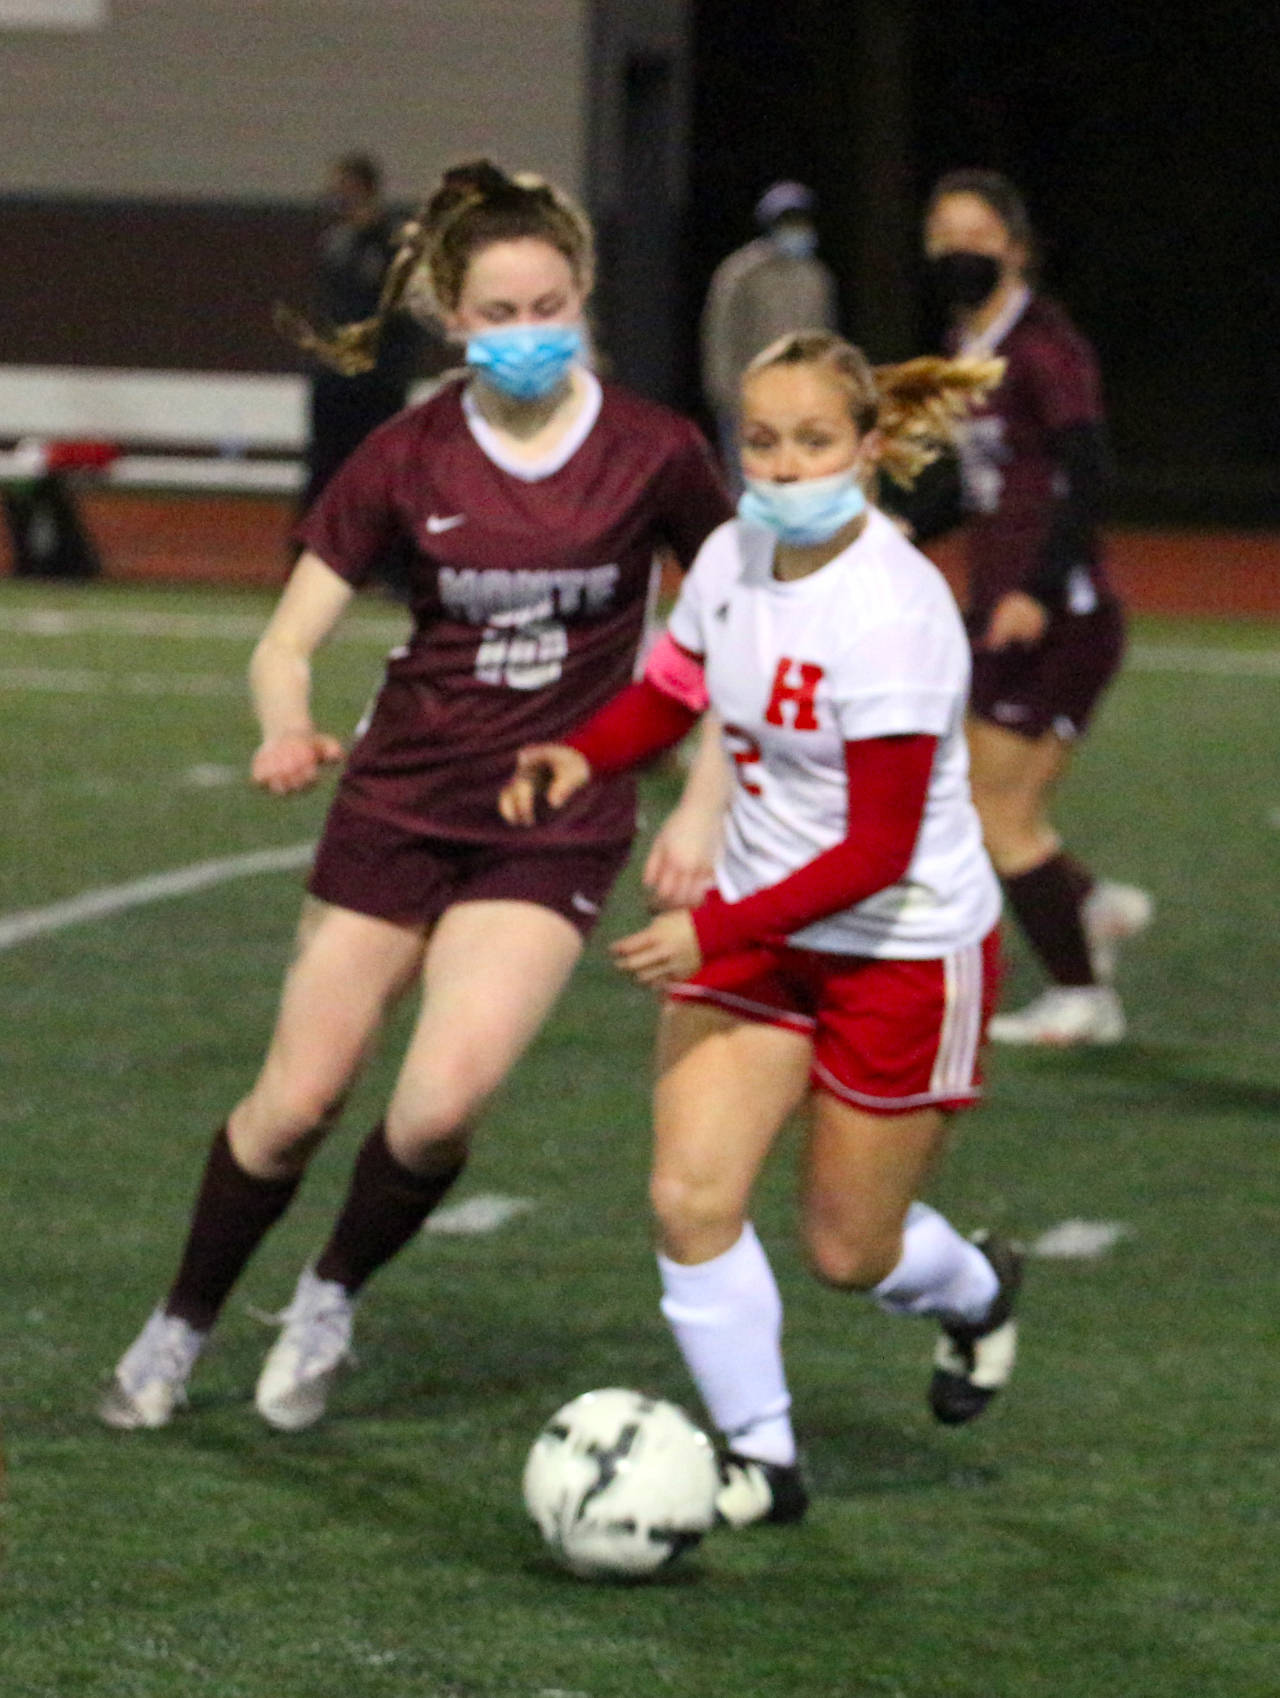 Hoquiam forward Sadie Carlyle, right, looks to pass while being defended by Montesano midfielder Brooke Streeter during Tuesday's game at Jack Rottle Field in Montesano. (Ryan Sparks | The Daily World)